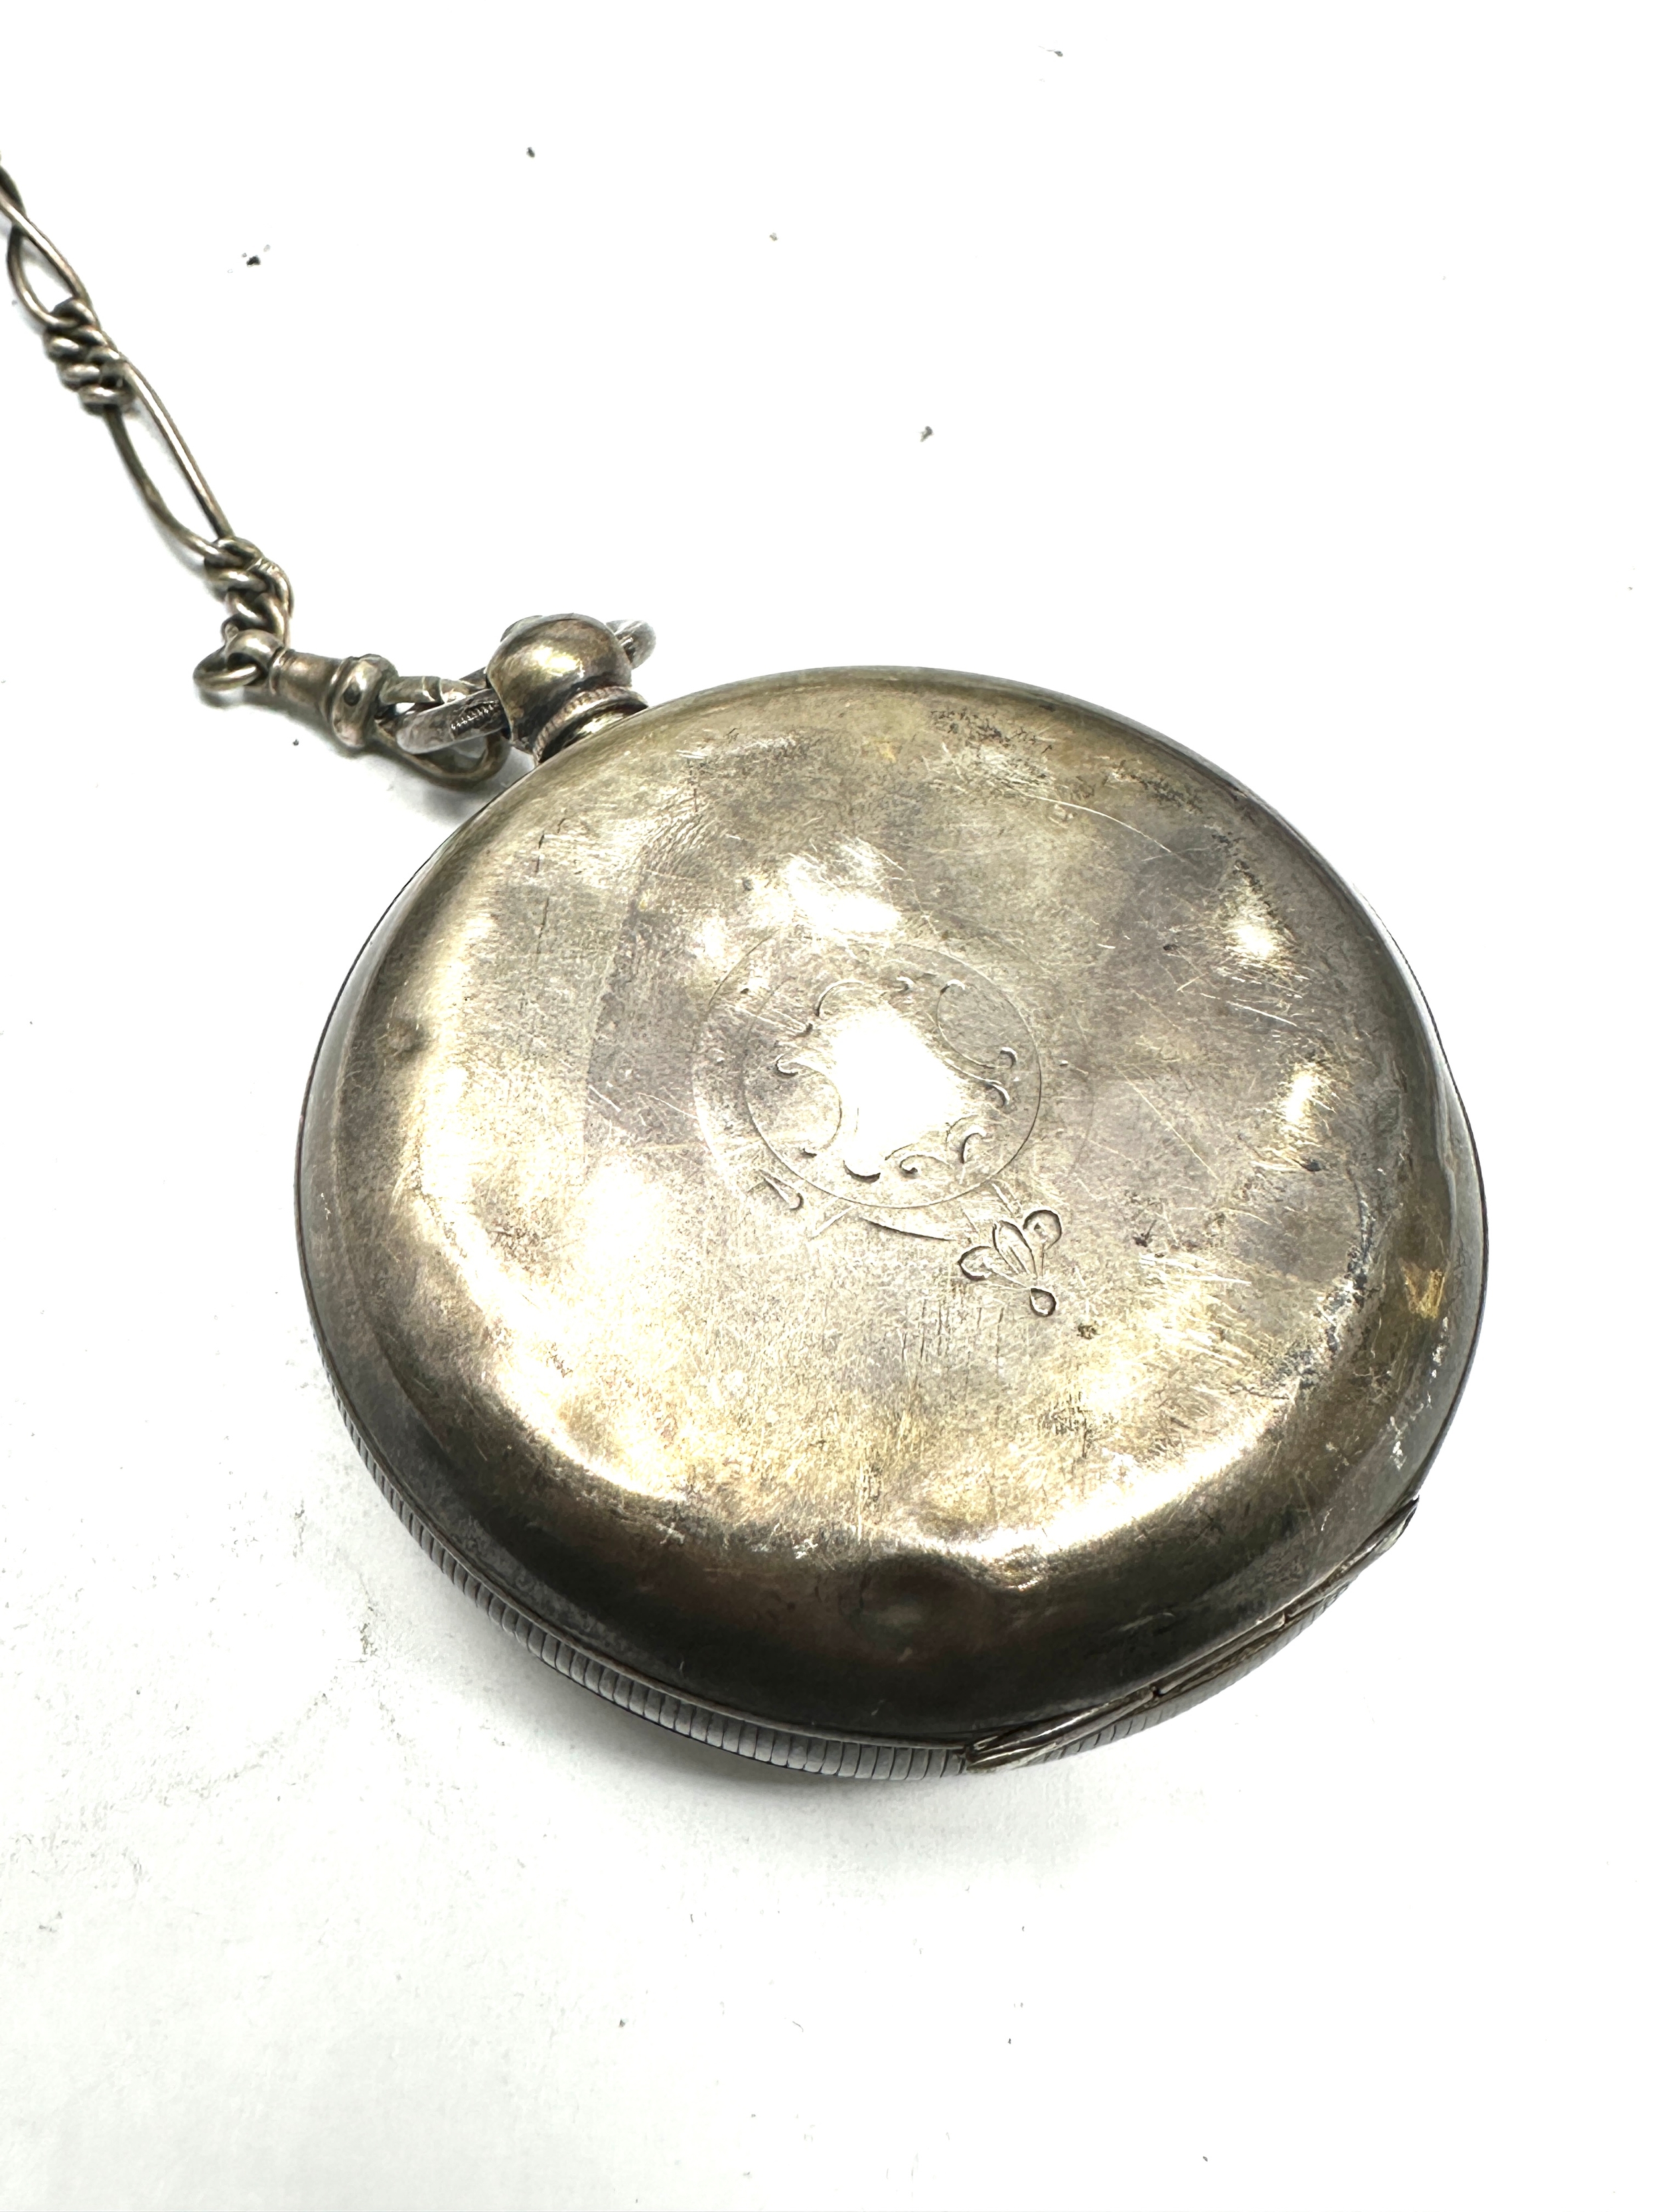 Antique silver open face pocket watch the watch is ticking with silver watch chain no t-bar - Bild 2 aus 3